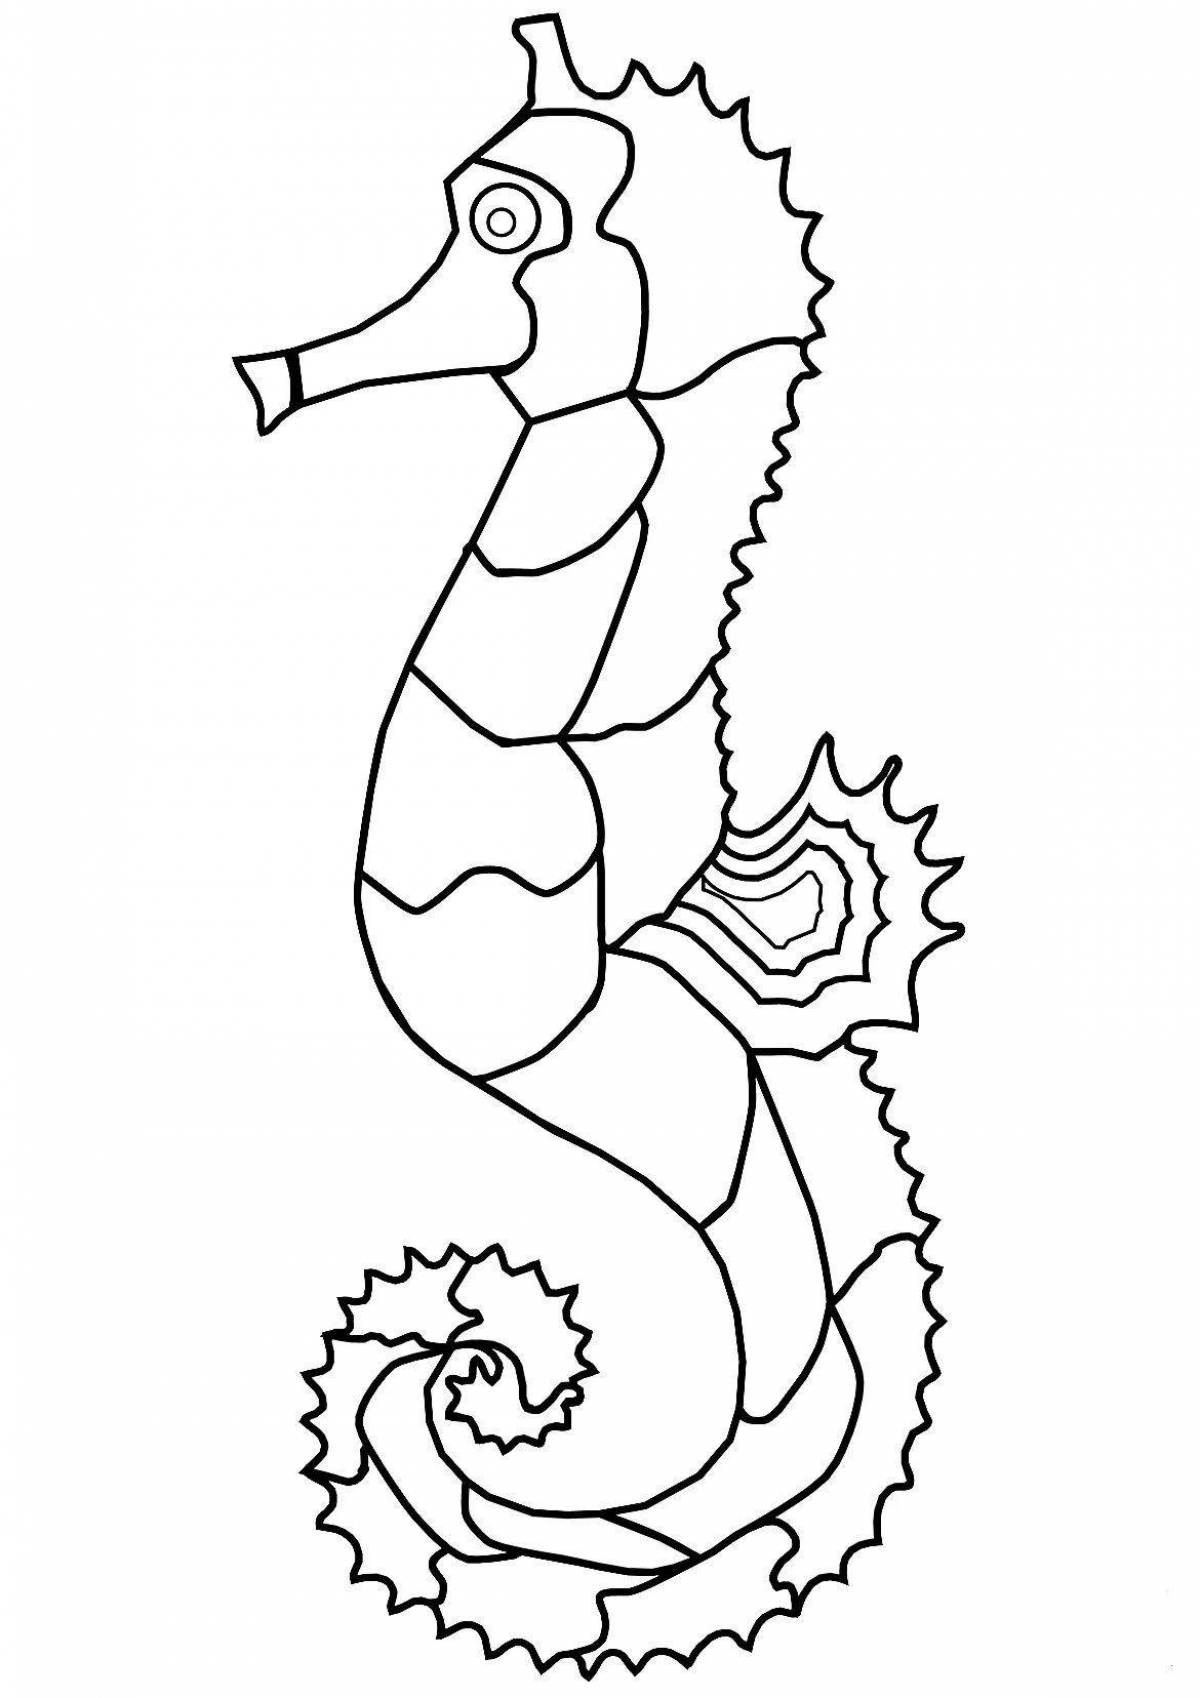 Incredible seahorse coloring book for kids